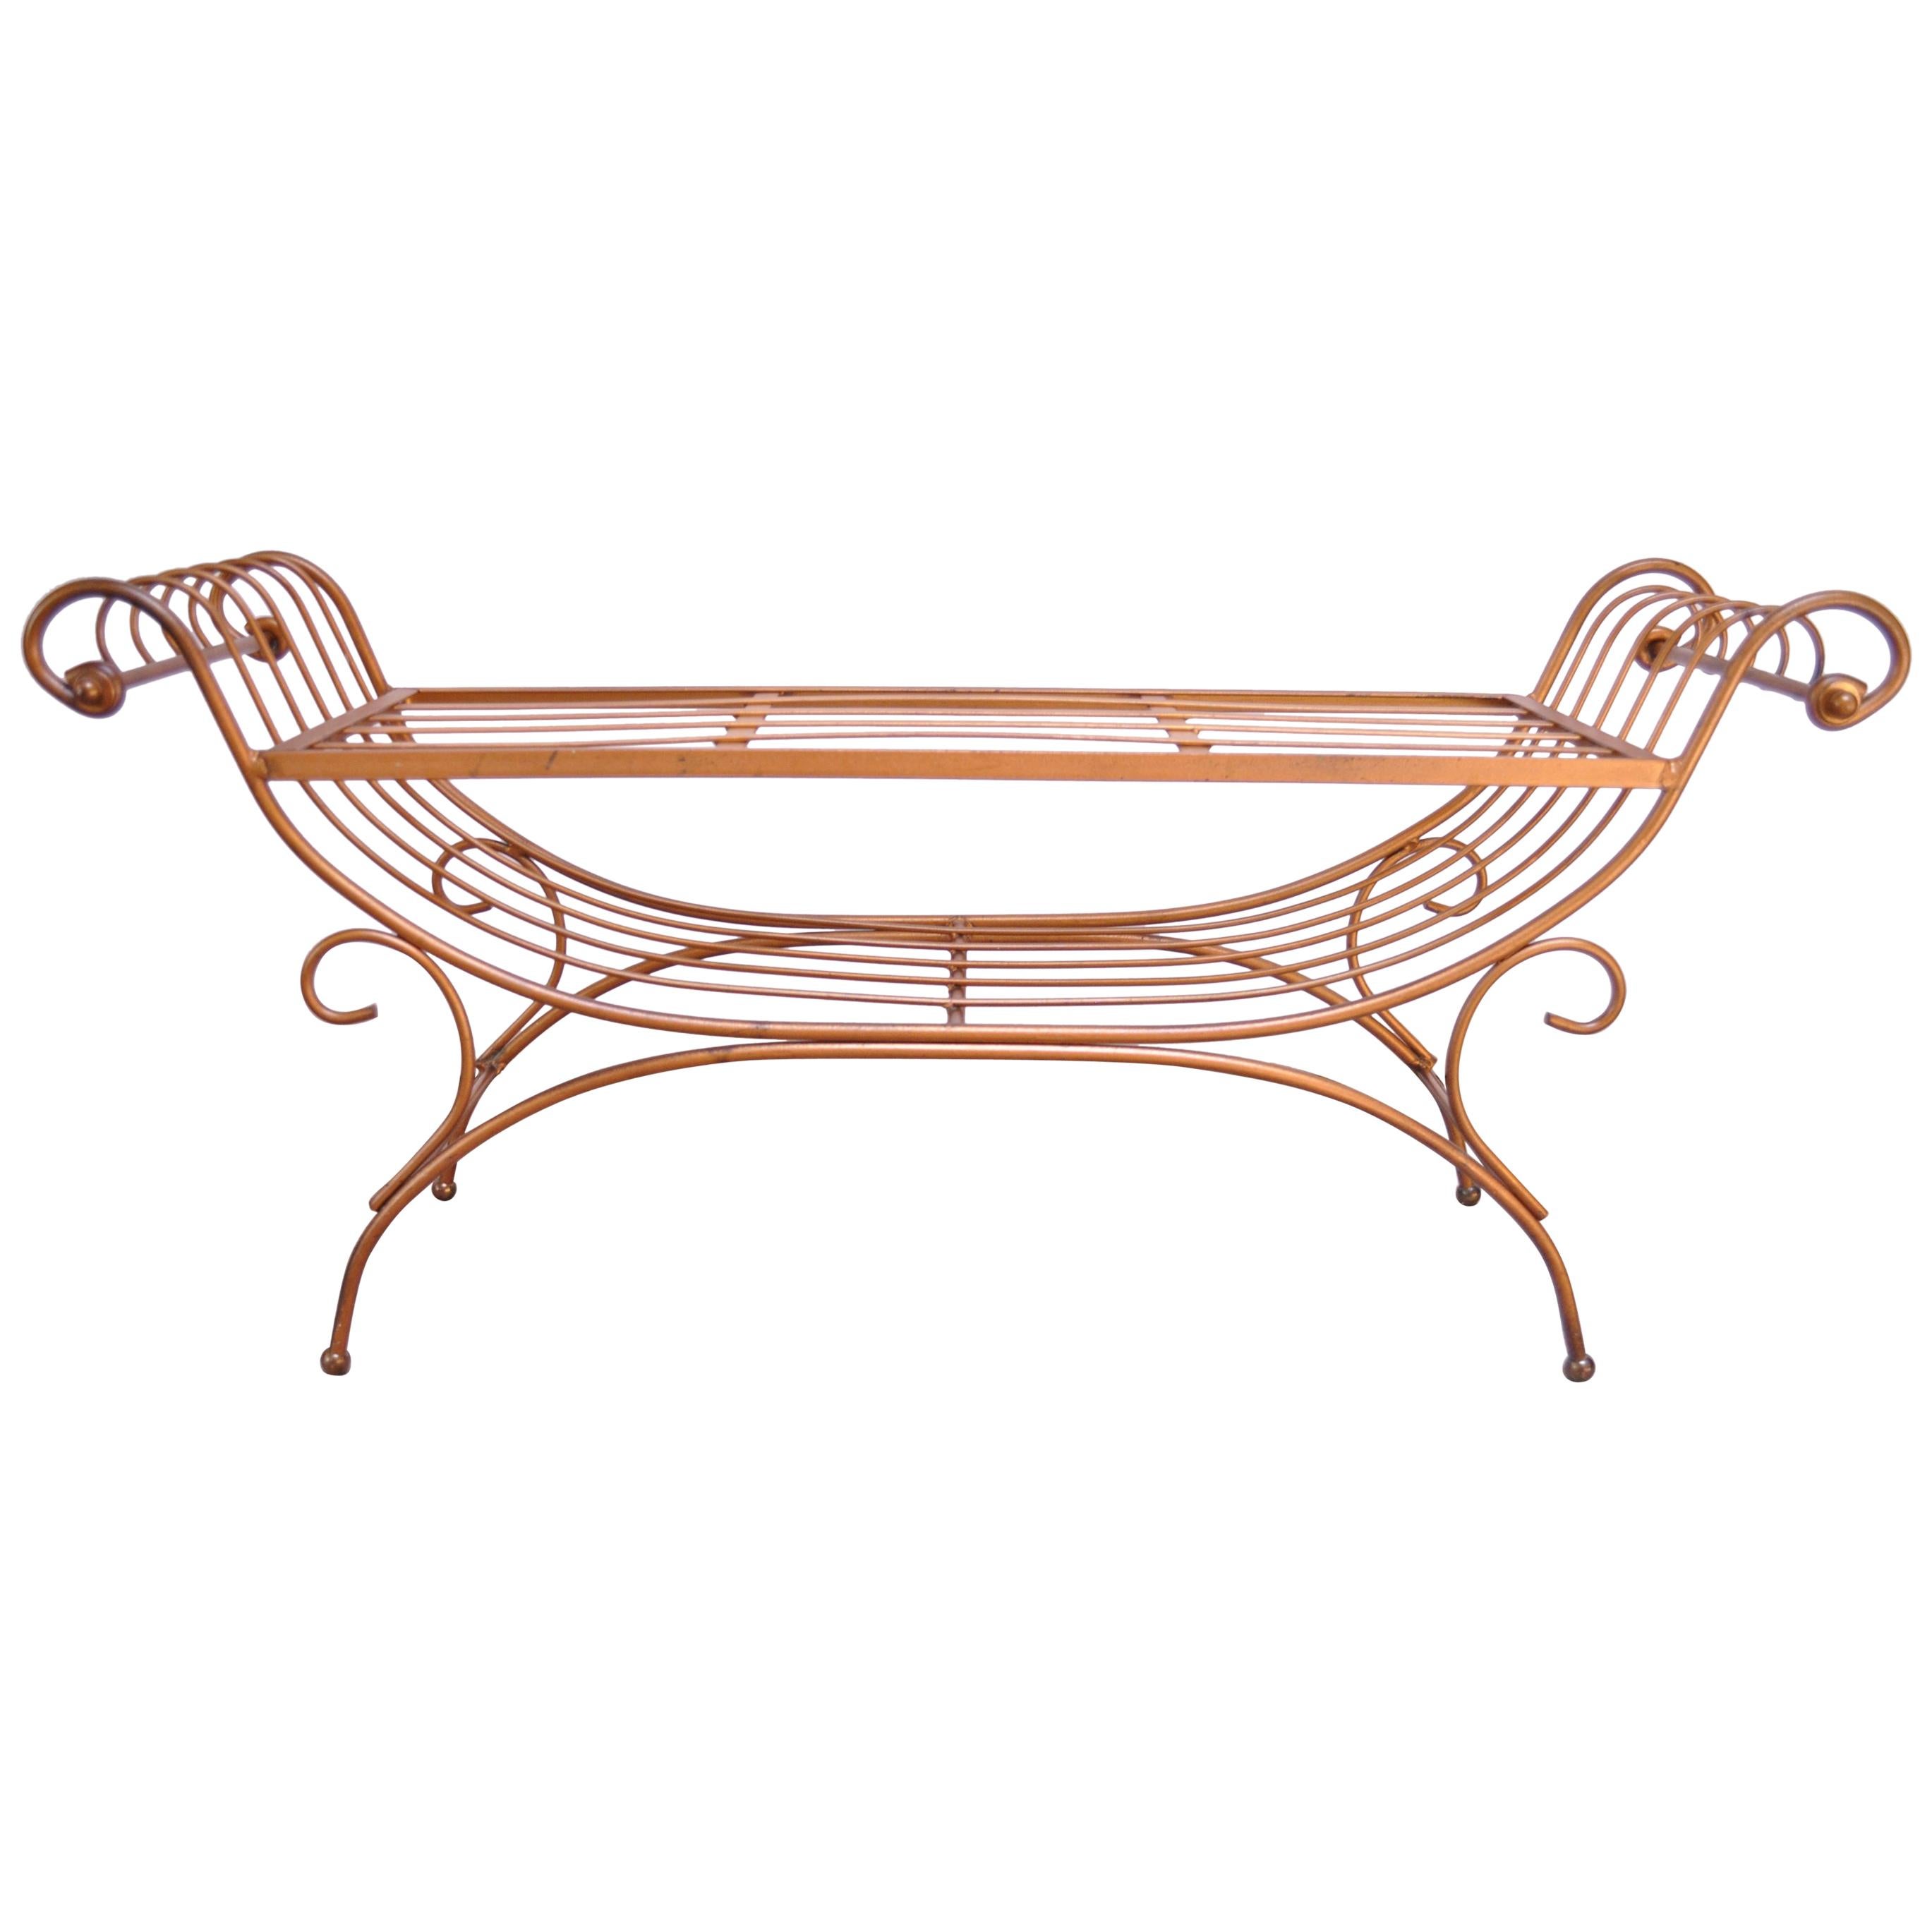 This circa 1950s Italian bench is composed of a patinated brass frame whose design resembles a lyre's form with strings that branch out into curved arms. There are minor spots of tarnish to the brass, as shown. The original cushion has been well